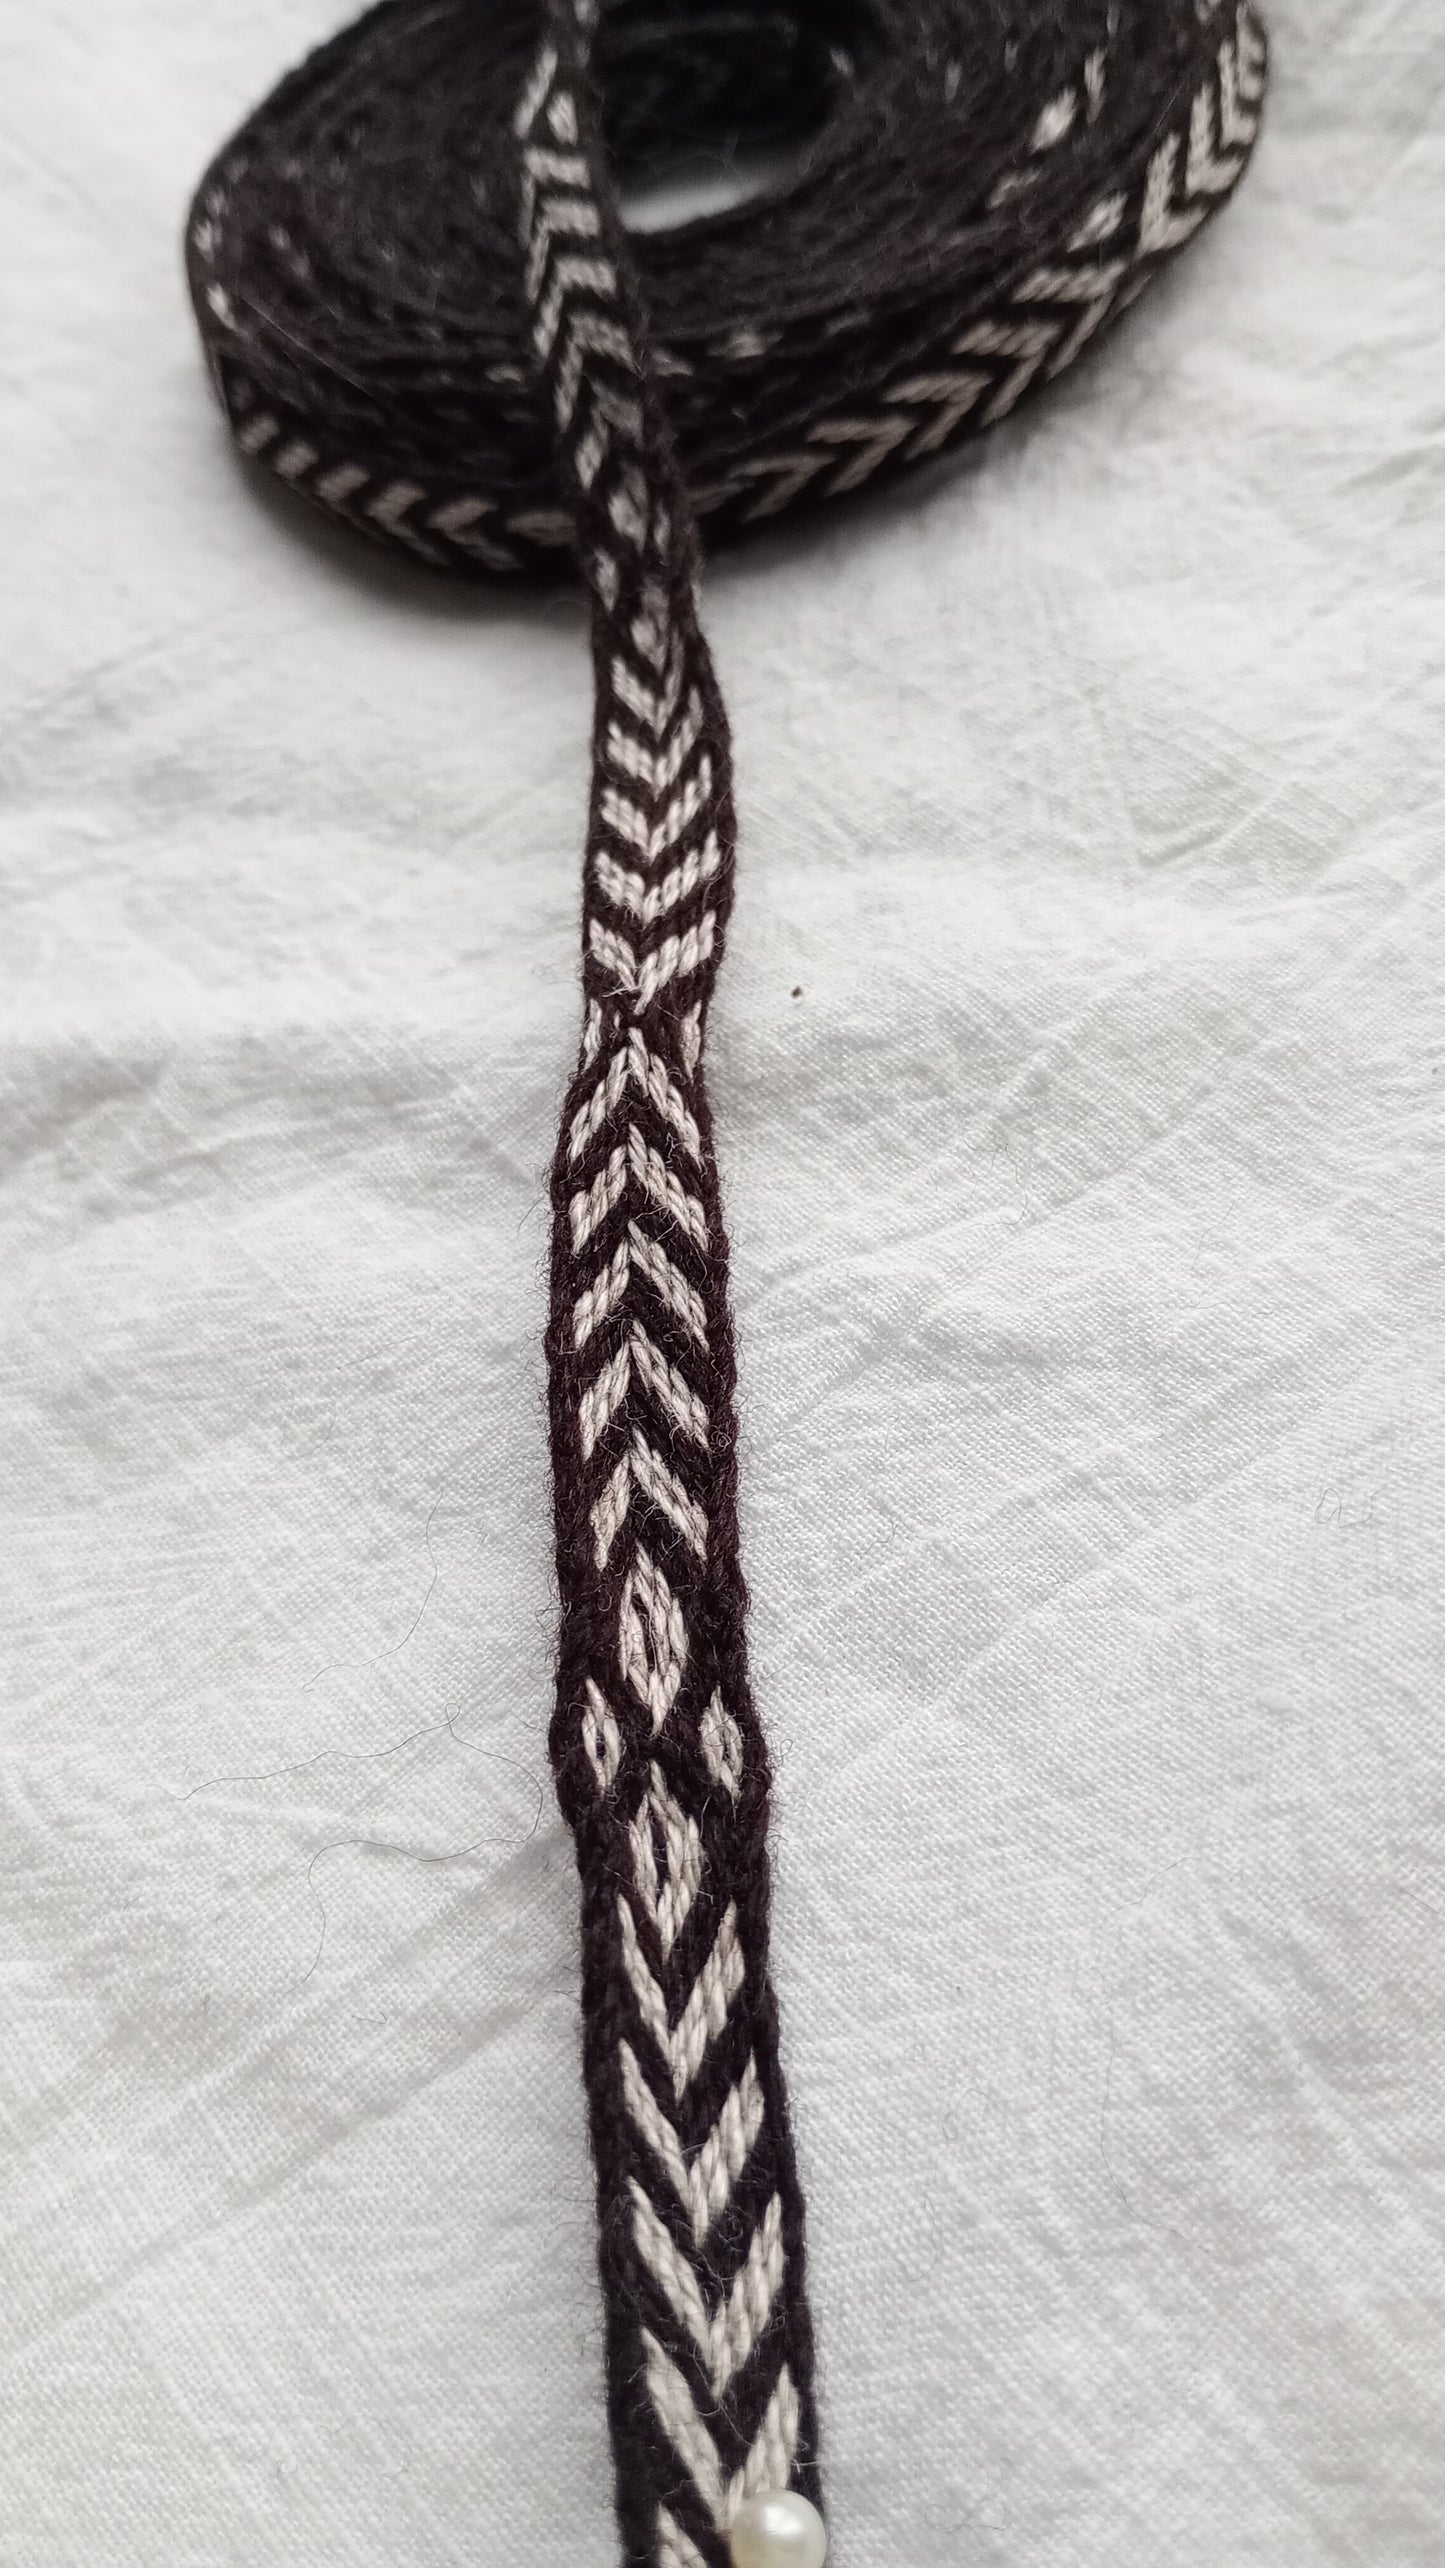 Reconstruction of 9-10th century Viking tablet woven trim from Kaupang